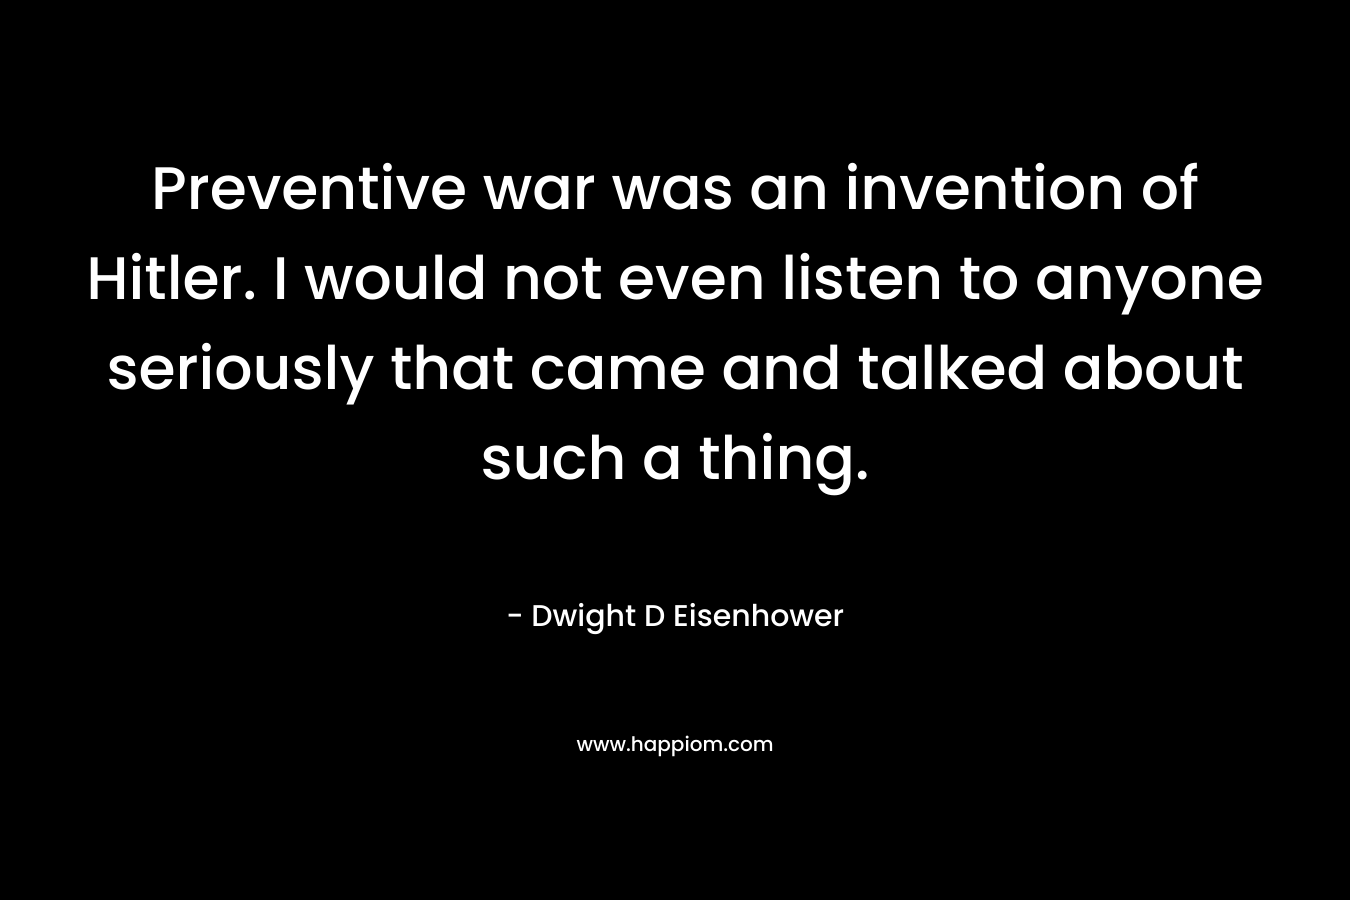 Preventive war was an invention of Hitler. I would not even listen to anyone seriously that came and talked about such a thing.